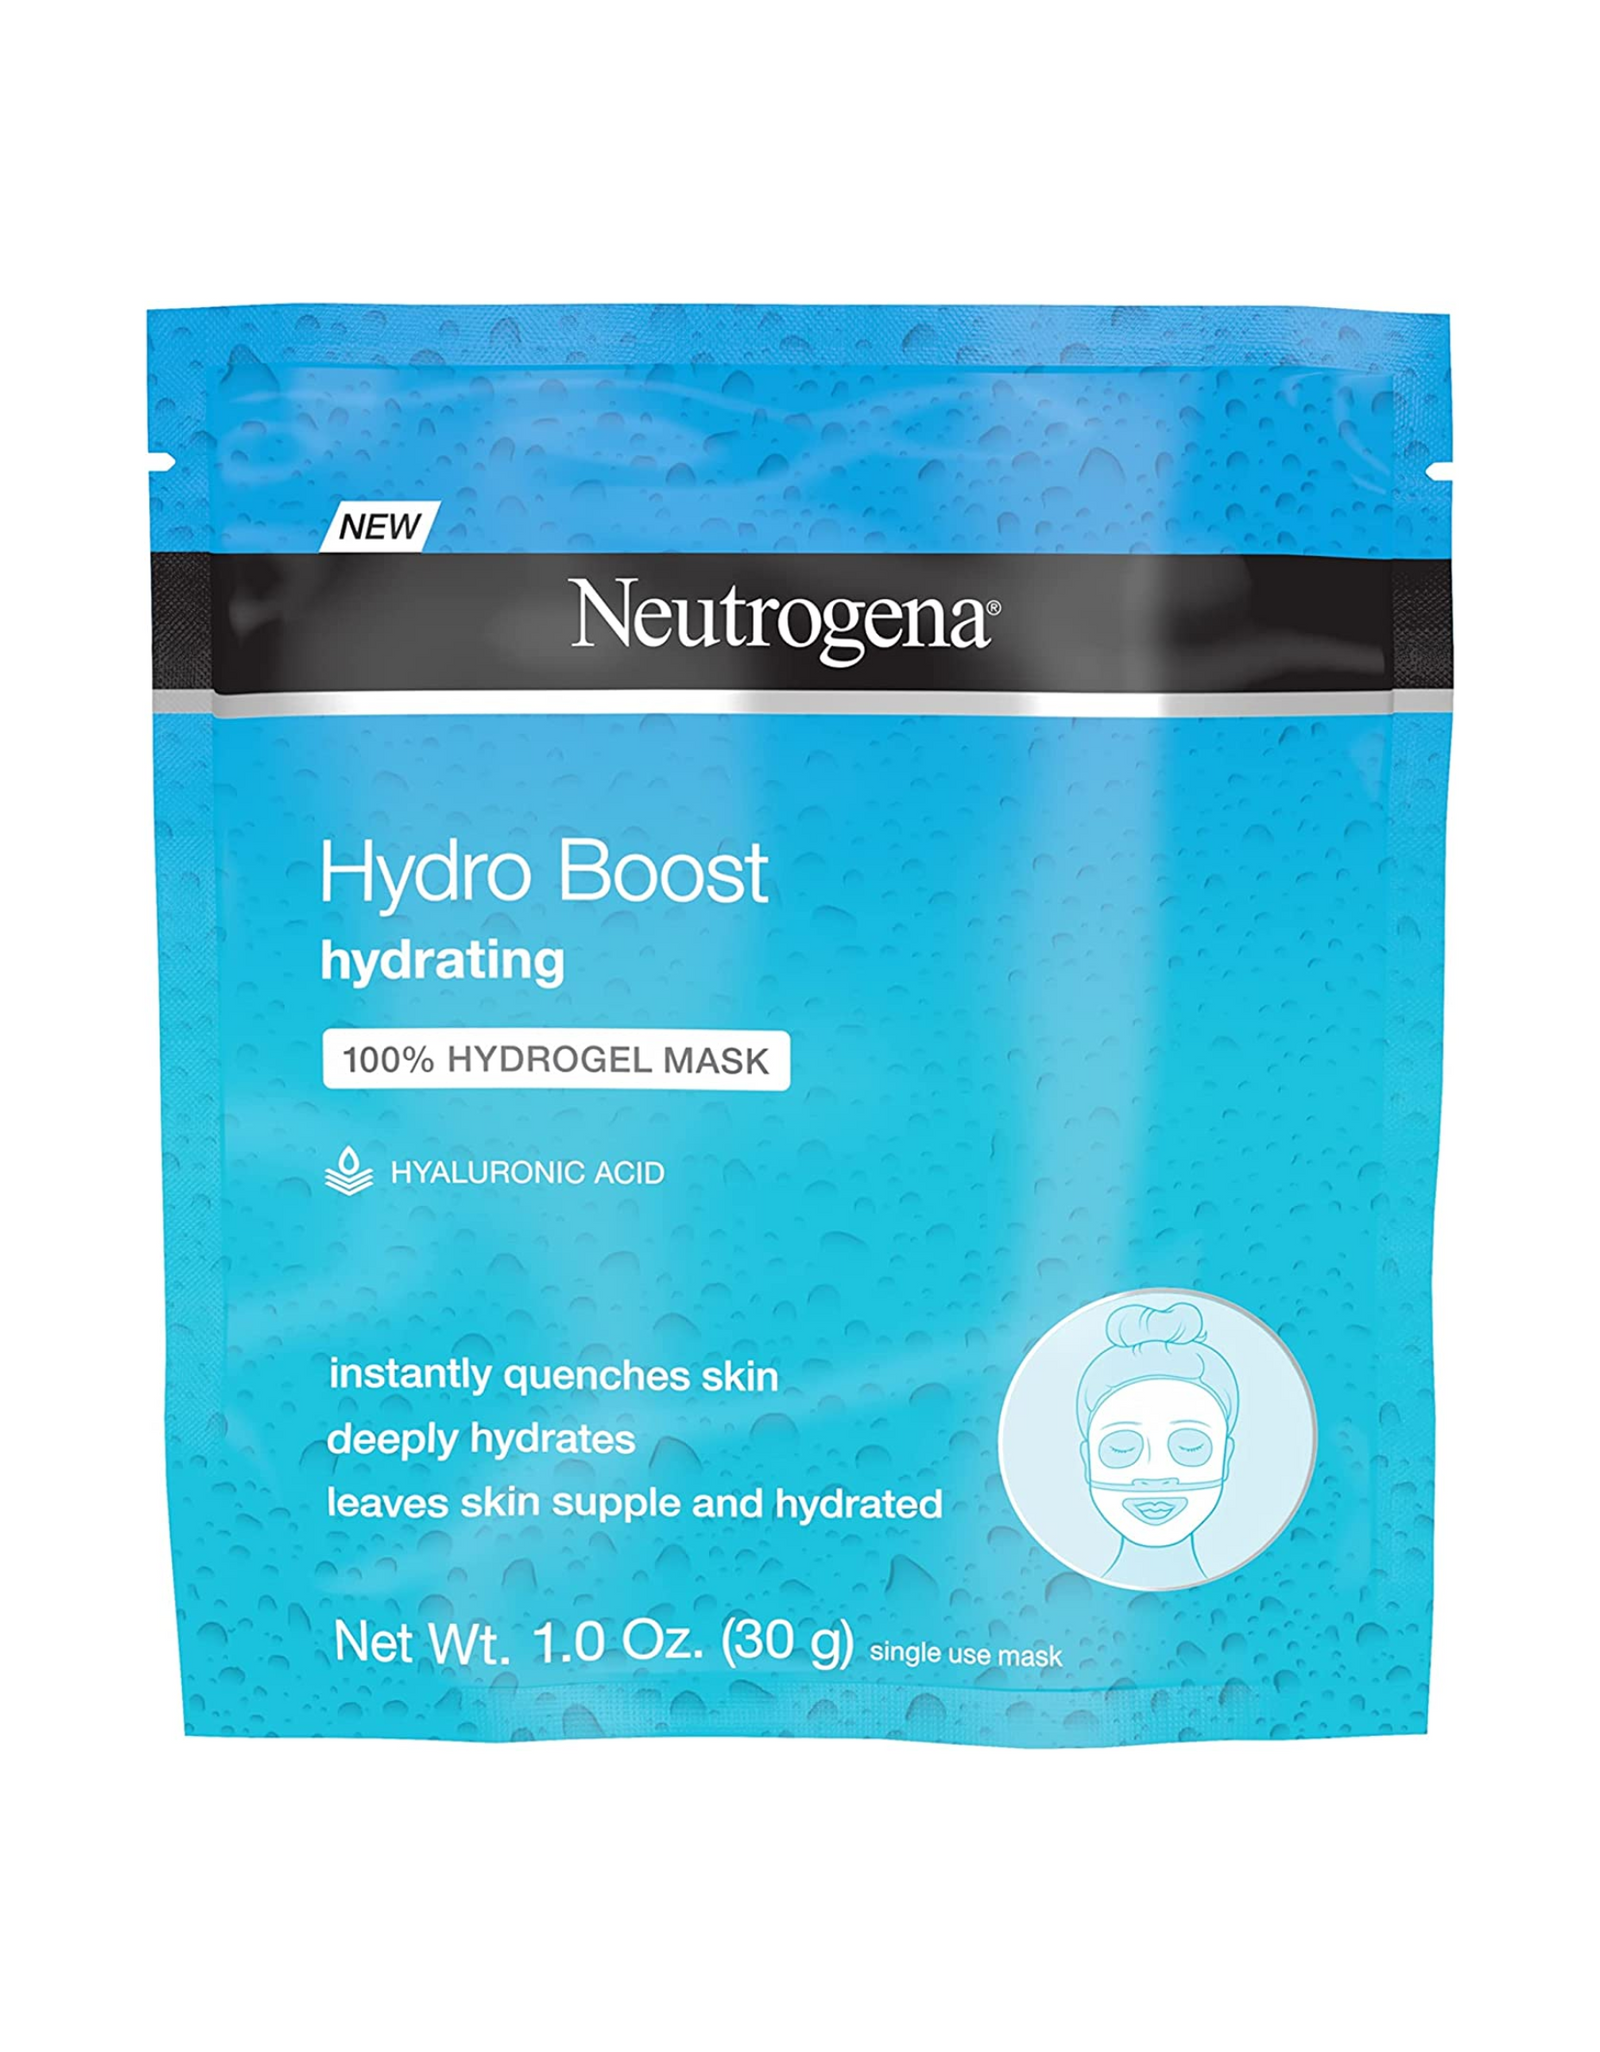 Neutrogena Hydro Boost Moisturizing & Hydrating 100% Hydrogel Sheet Face Mask for Dry Skin with Hyaluronic Acid, Gentle & Non-Comedogenic, 12 Count